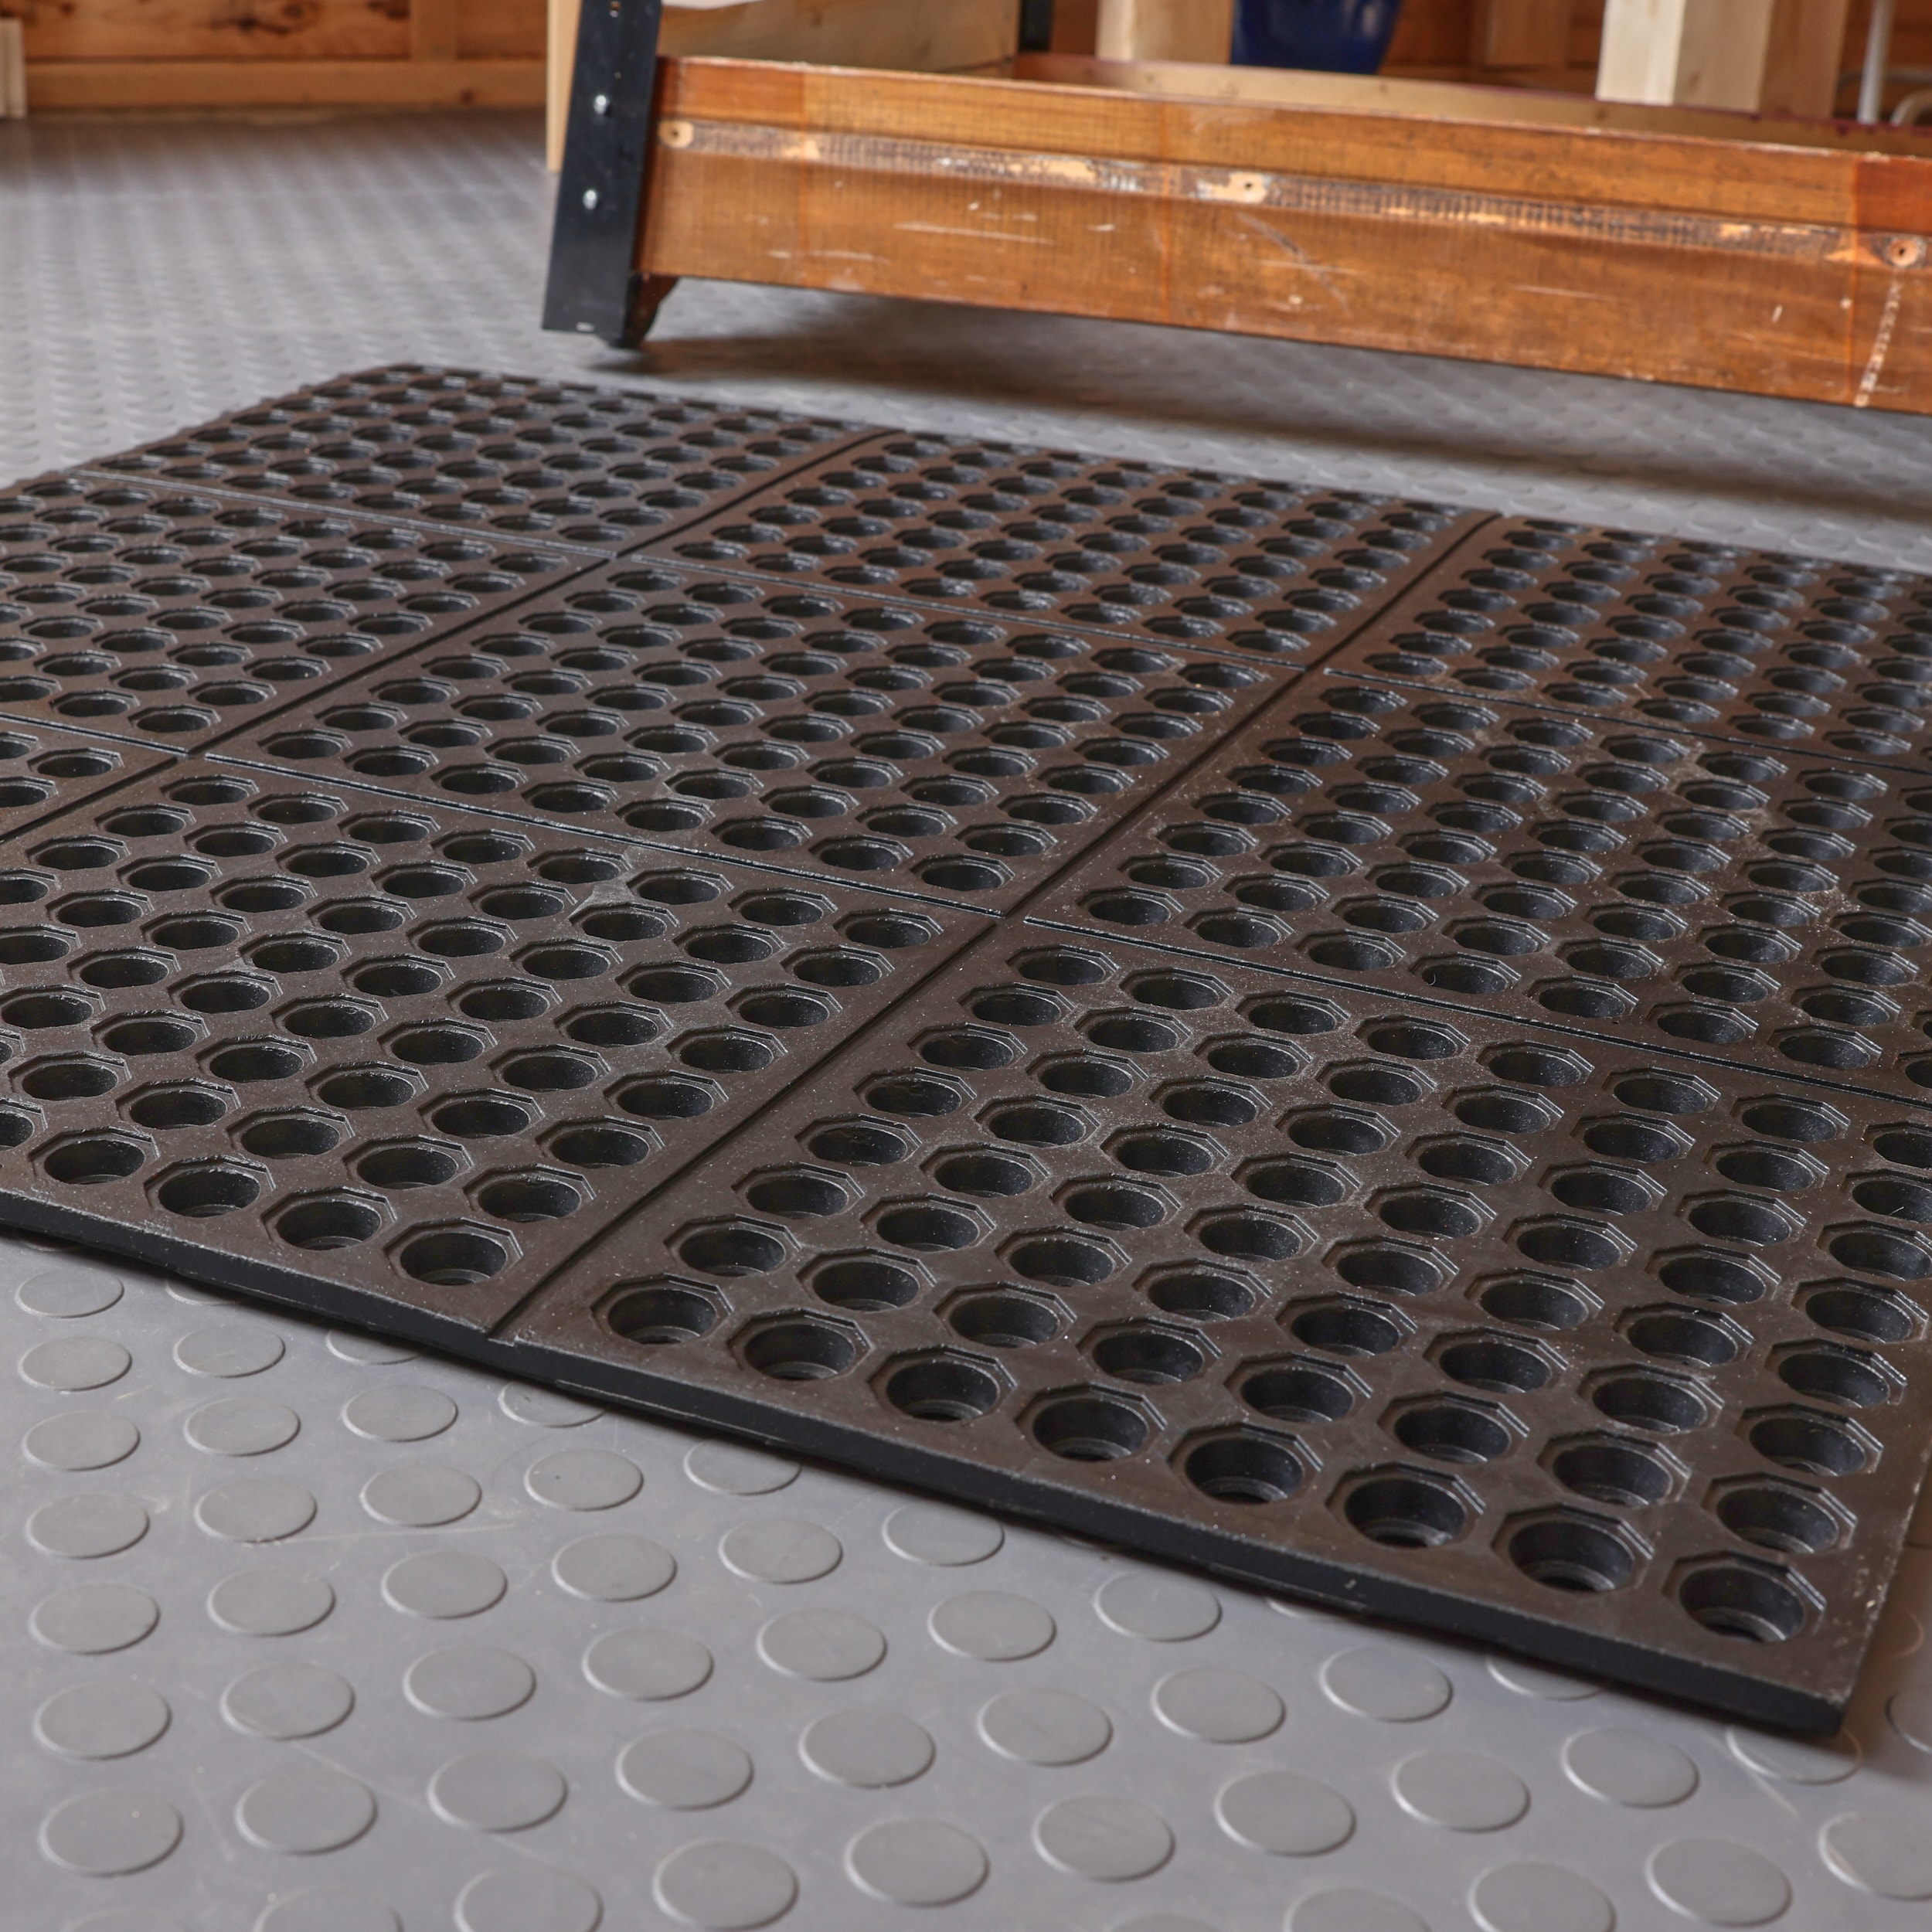 Anti-Fatigue Mats: Do They Really Work According to Science?, by  Richhotsot